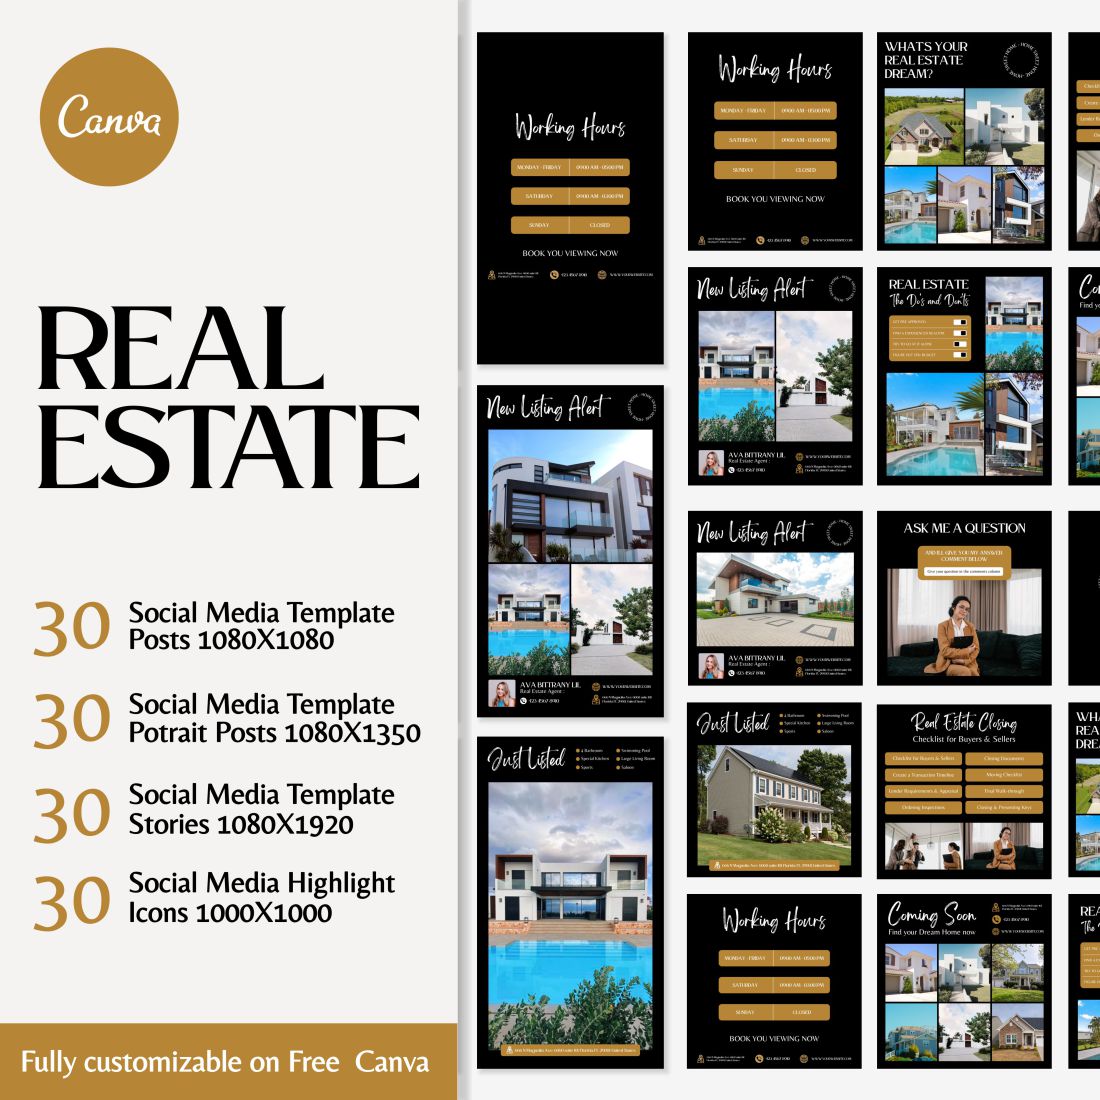 Instagram Templates Real Estate cover images.